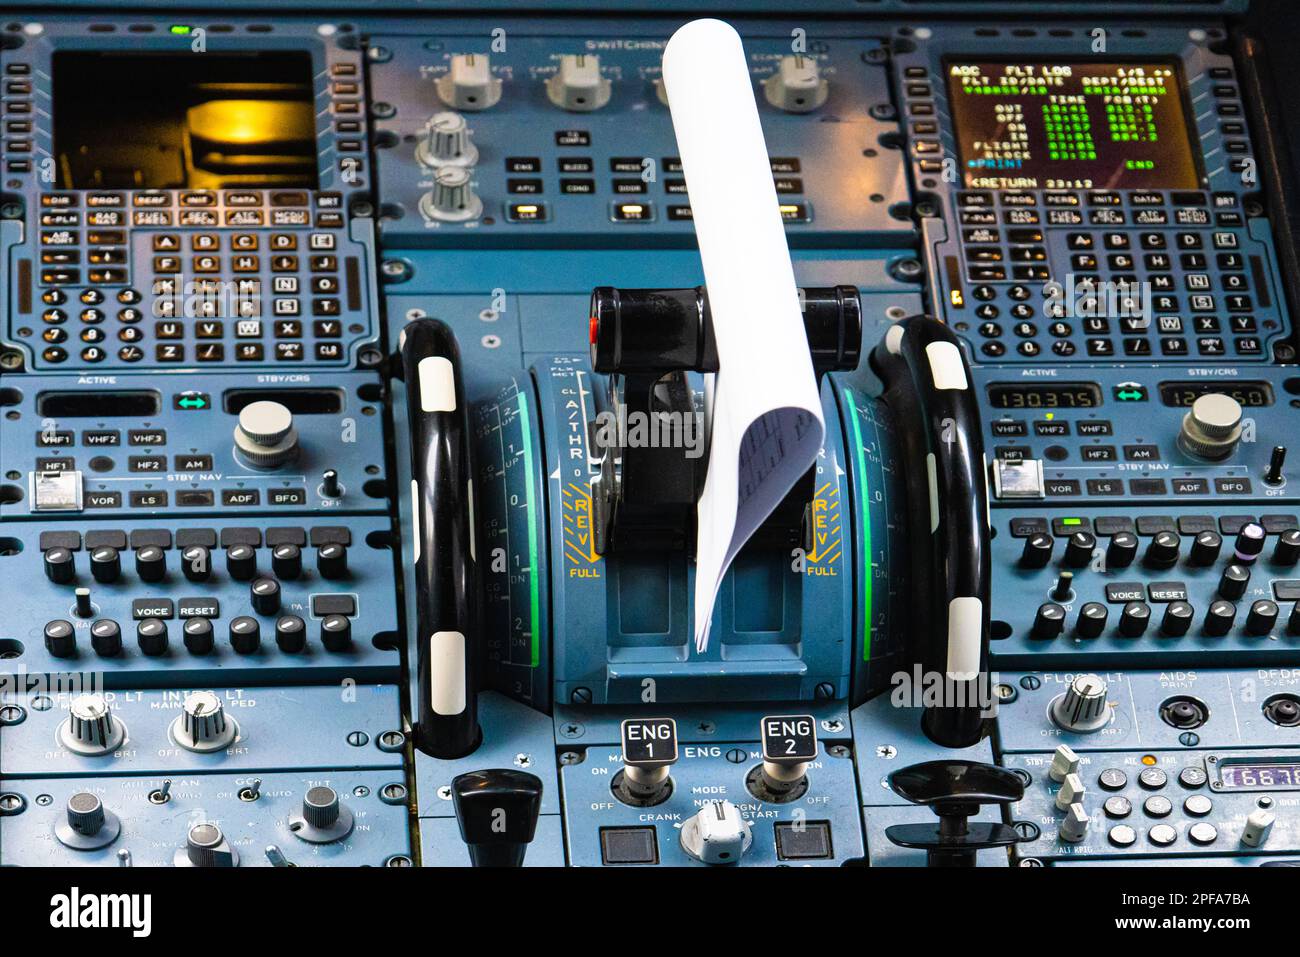 Flight control panel and flight management system in civil airplane cockpit. Stock Photo